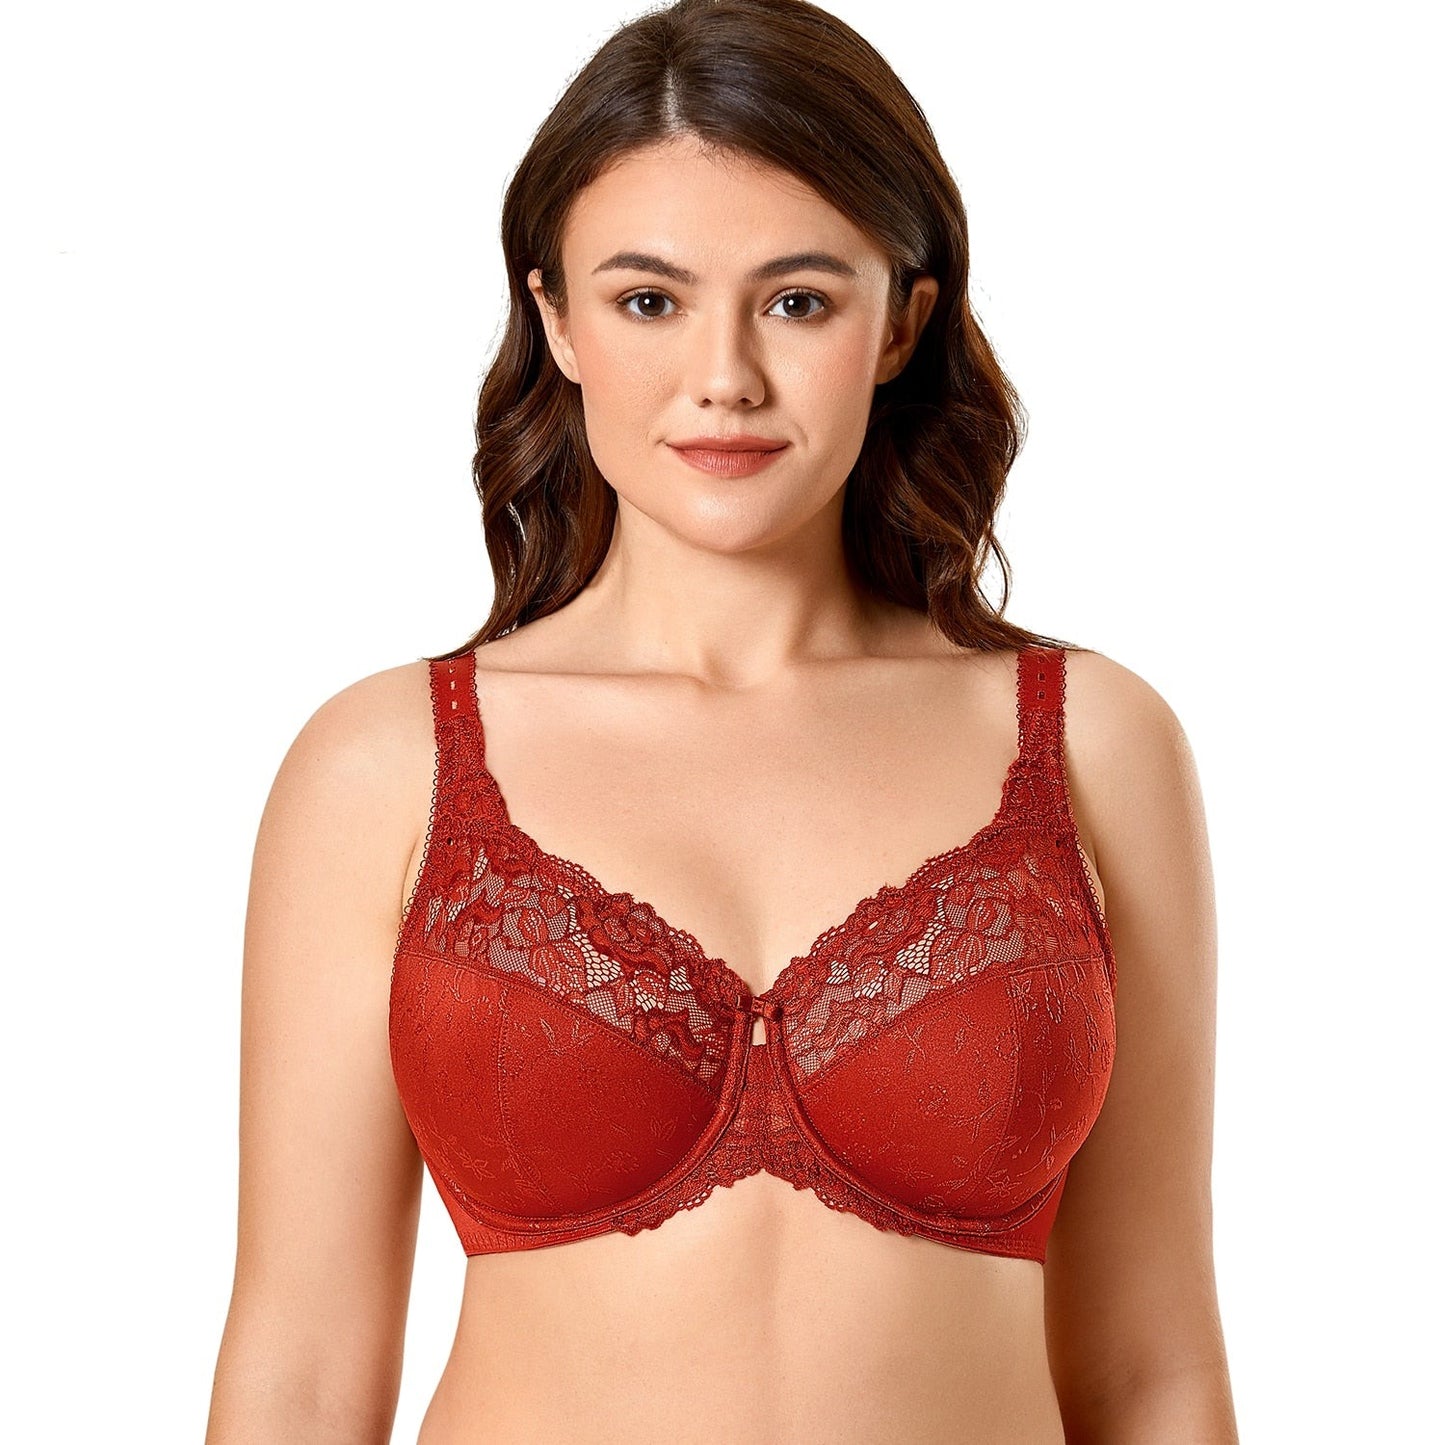 Buy CG-44 LACESSITI NON PADDED UNDERWIRED CANDY RED BRA in